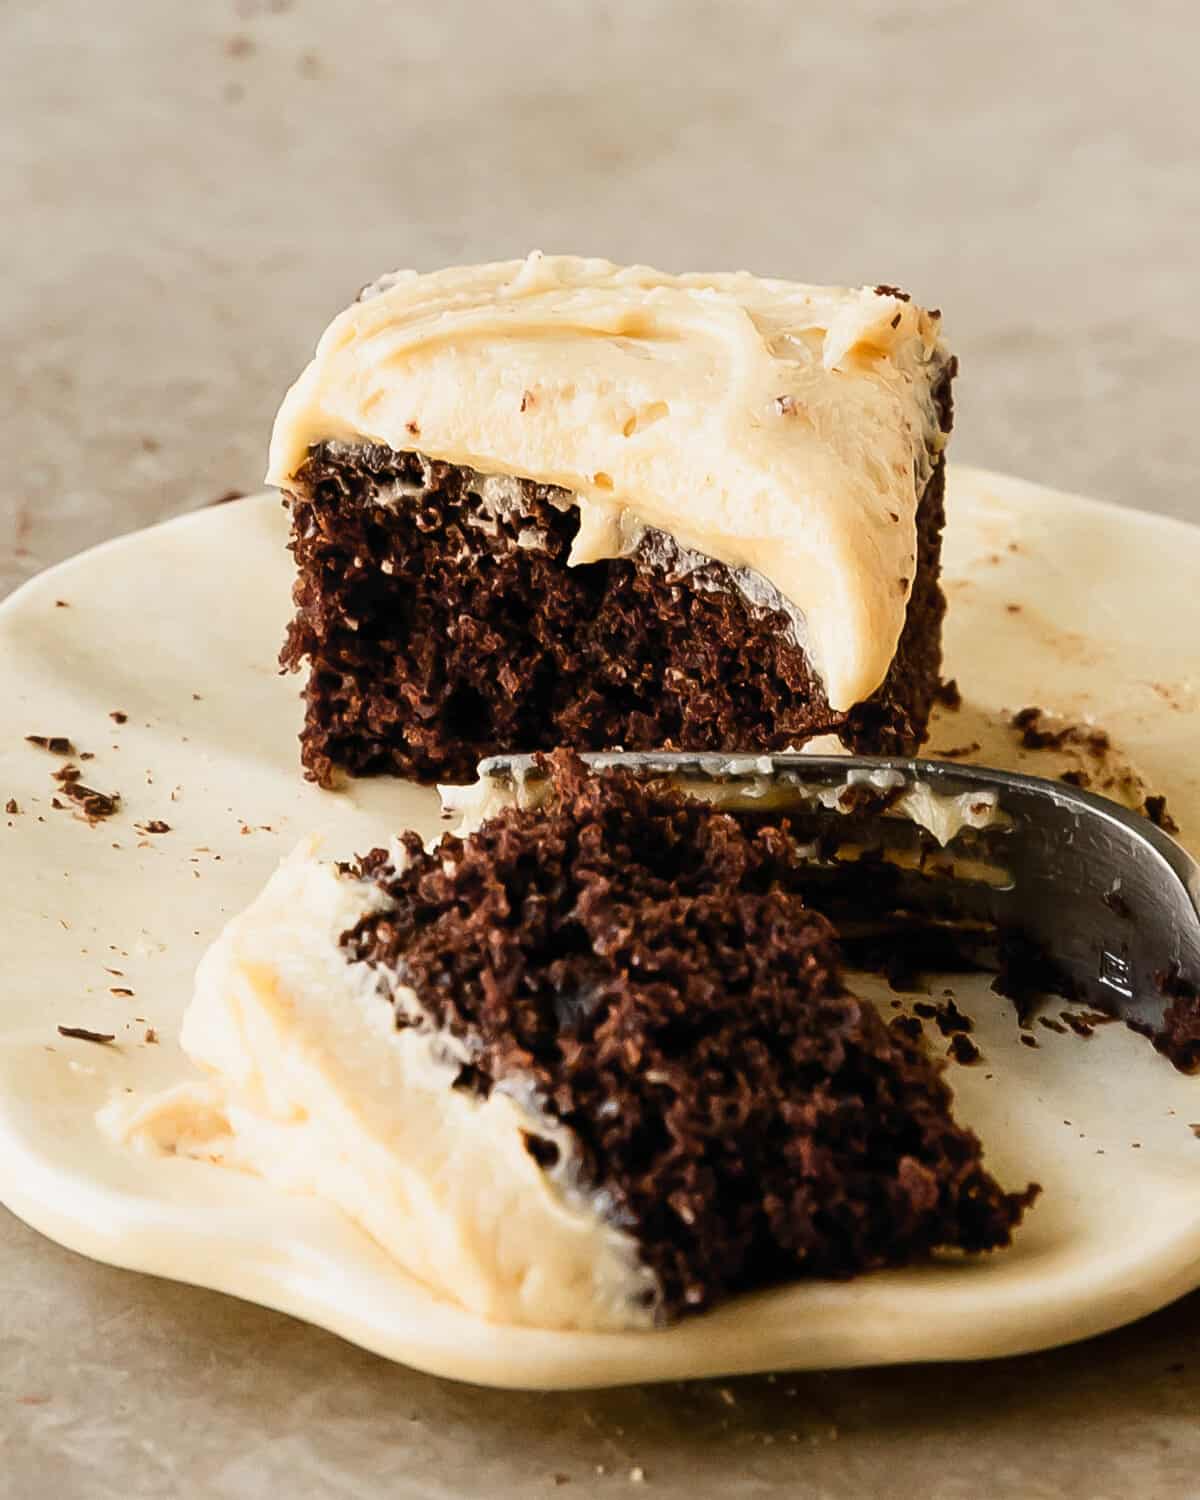 Chocolate banana cake is a moist and tender, from scratch chocolate cake filled with banana flavor. It’s topped with a rich and decadent peanut butter cream cheese frosting and shaved chocolate. This banana chocolate cake is not only quick and simple to make using two bowls and a whisk, it’s also the easy perfect cake for any occasion.